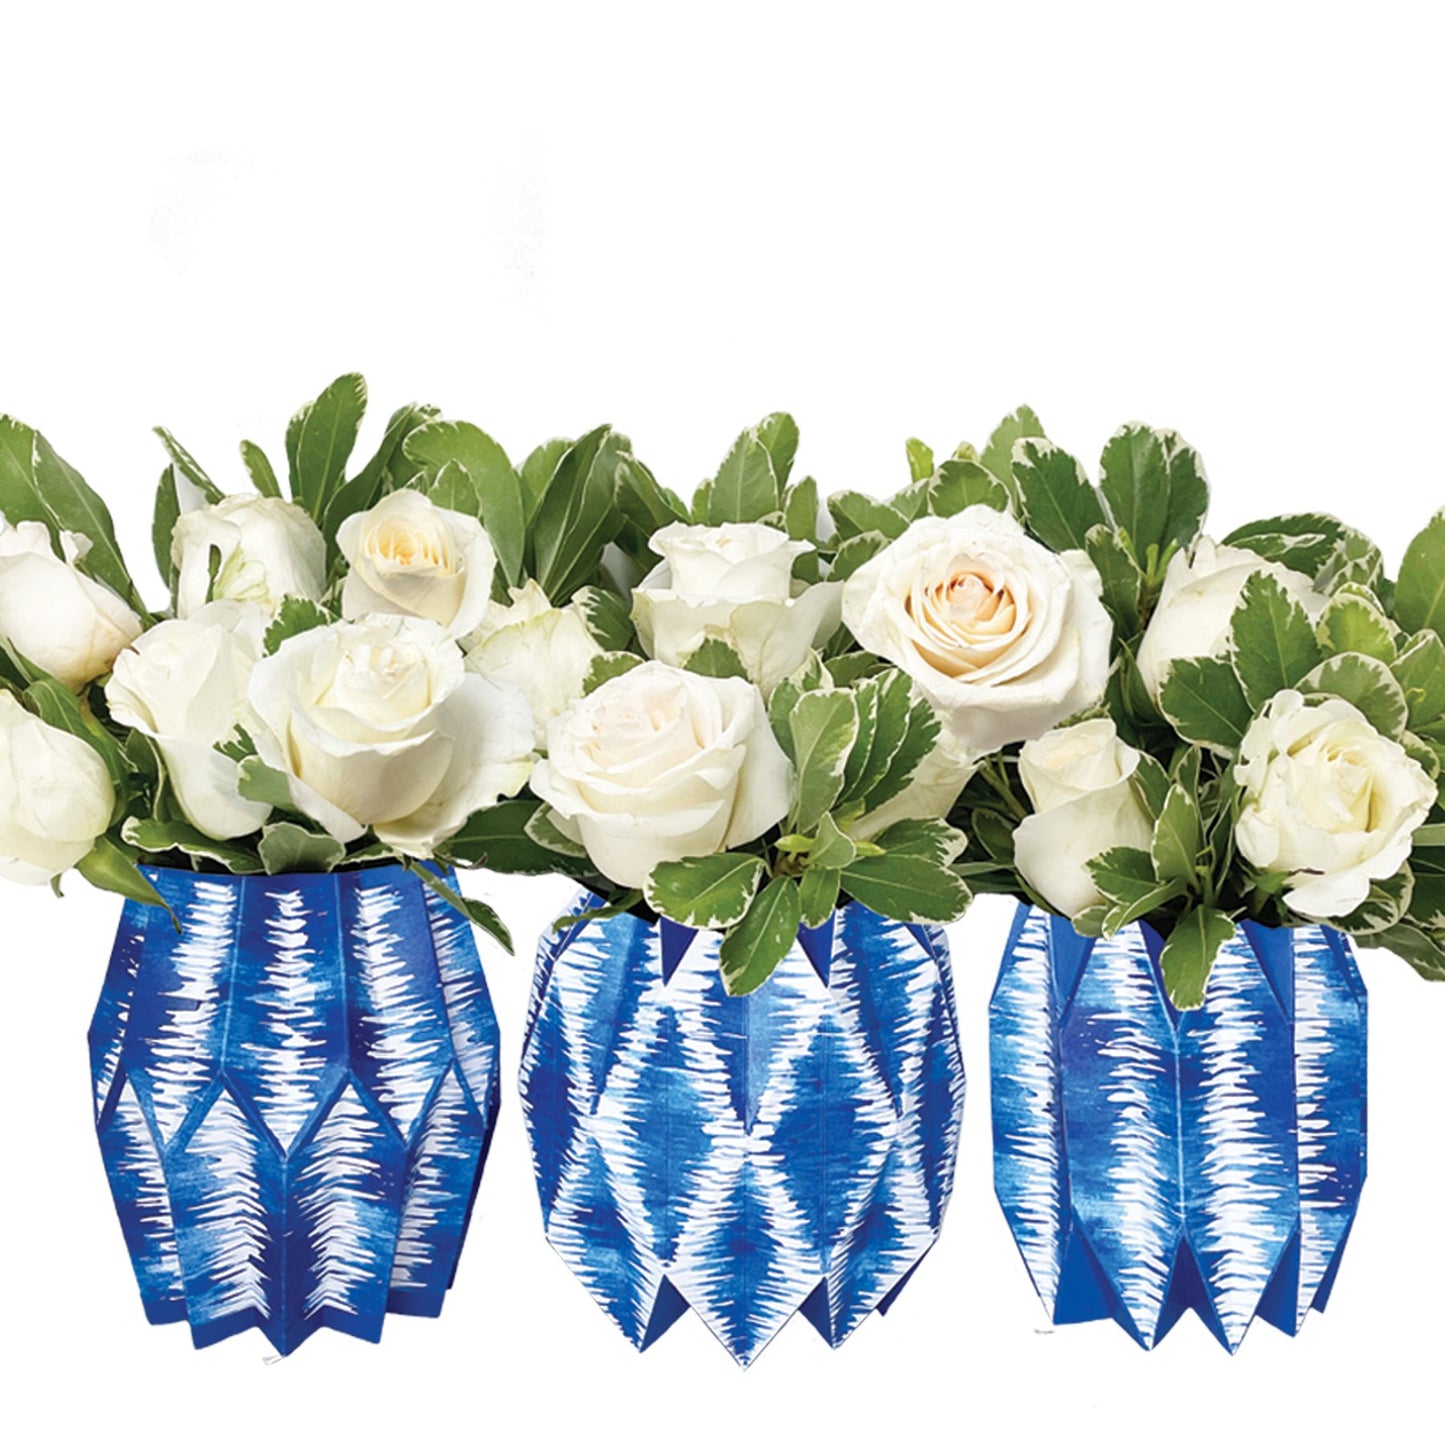 Blue ikat patterned paper vases with white roses